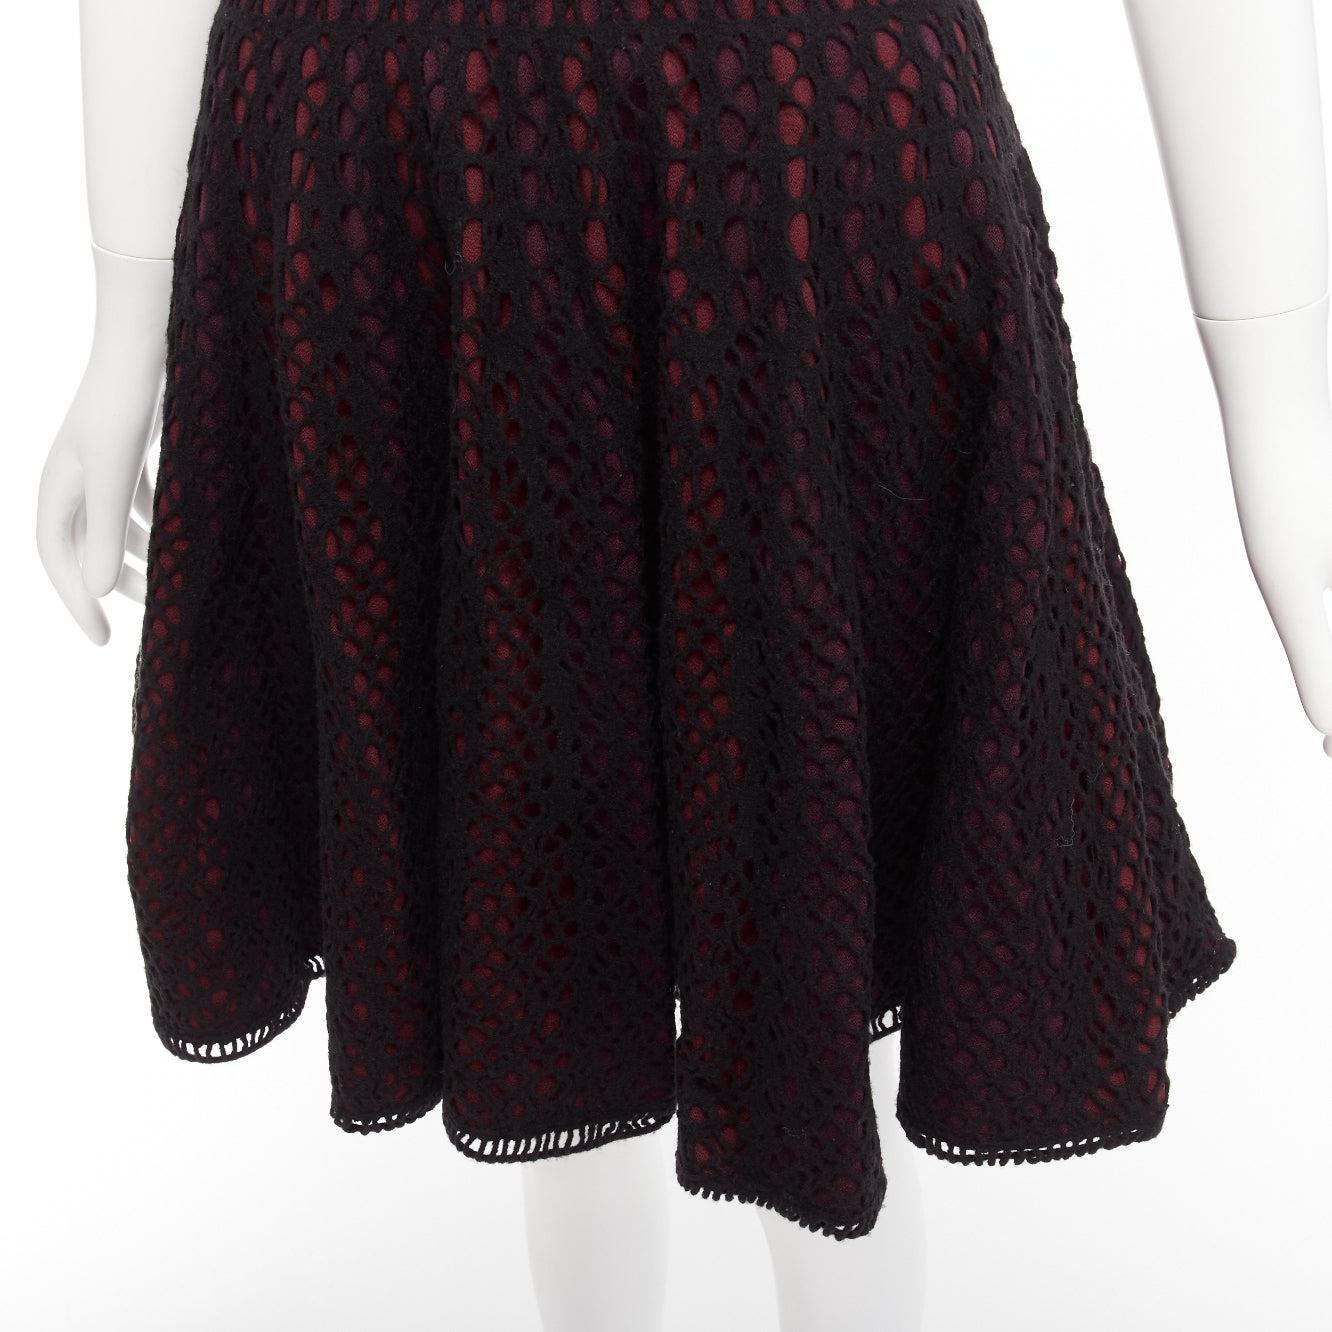 ALAIA black burgundy virgin wool blend cut out jacquard square neck dress FR36 S
Reference: AAWC/A01084
Brand: Alaia
Material: Virgin Wool, Blend
Color: Burgundy, Black
Pattern: Lace
Closure: Zip
Lining: Burgundy Fabric
Extra Details: Back zip.
Made